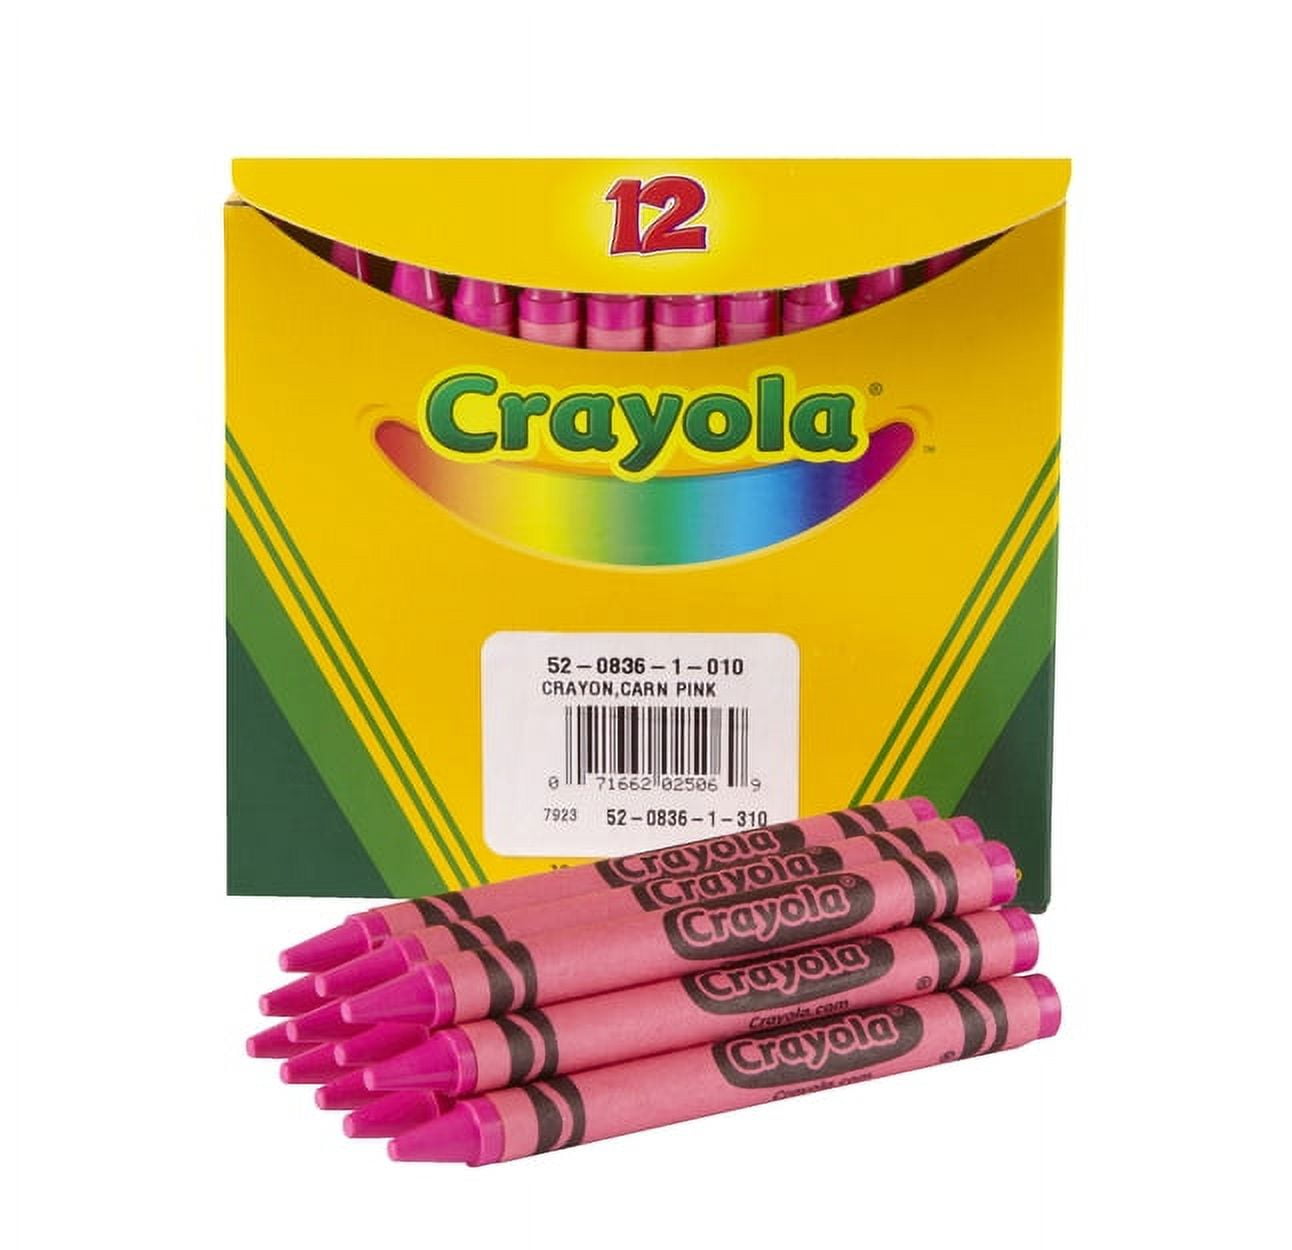 Idiy Unwrapped Bulk Wax Crayons (Pre-sorted 300 ct, 25 Each of 12 Colors) - No Paper, ASTM Safety Tested, for Kids, Teachers, Art Classrooms